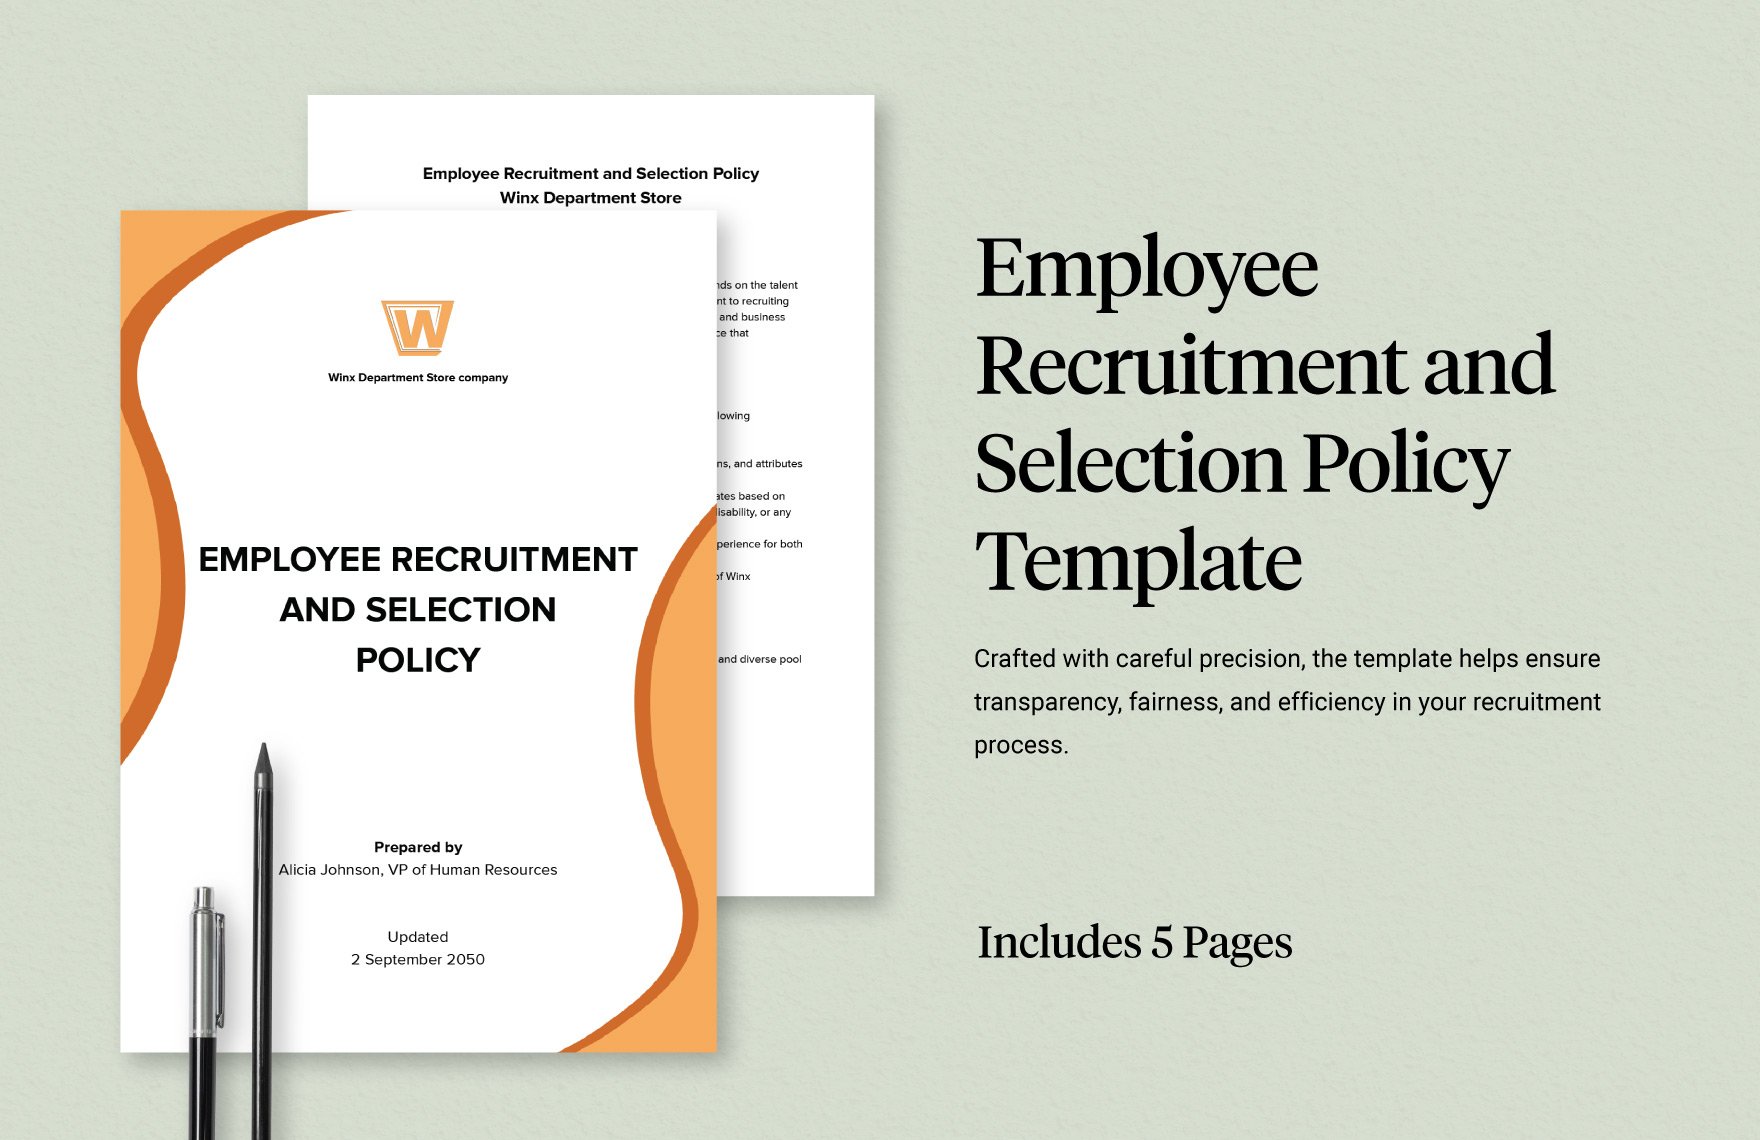 Employee Recruitment and Selection Policy Template in Word, Google Docs, PDF